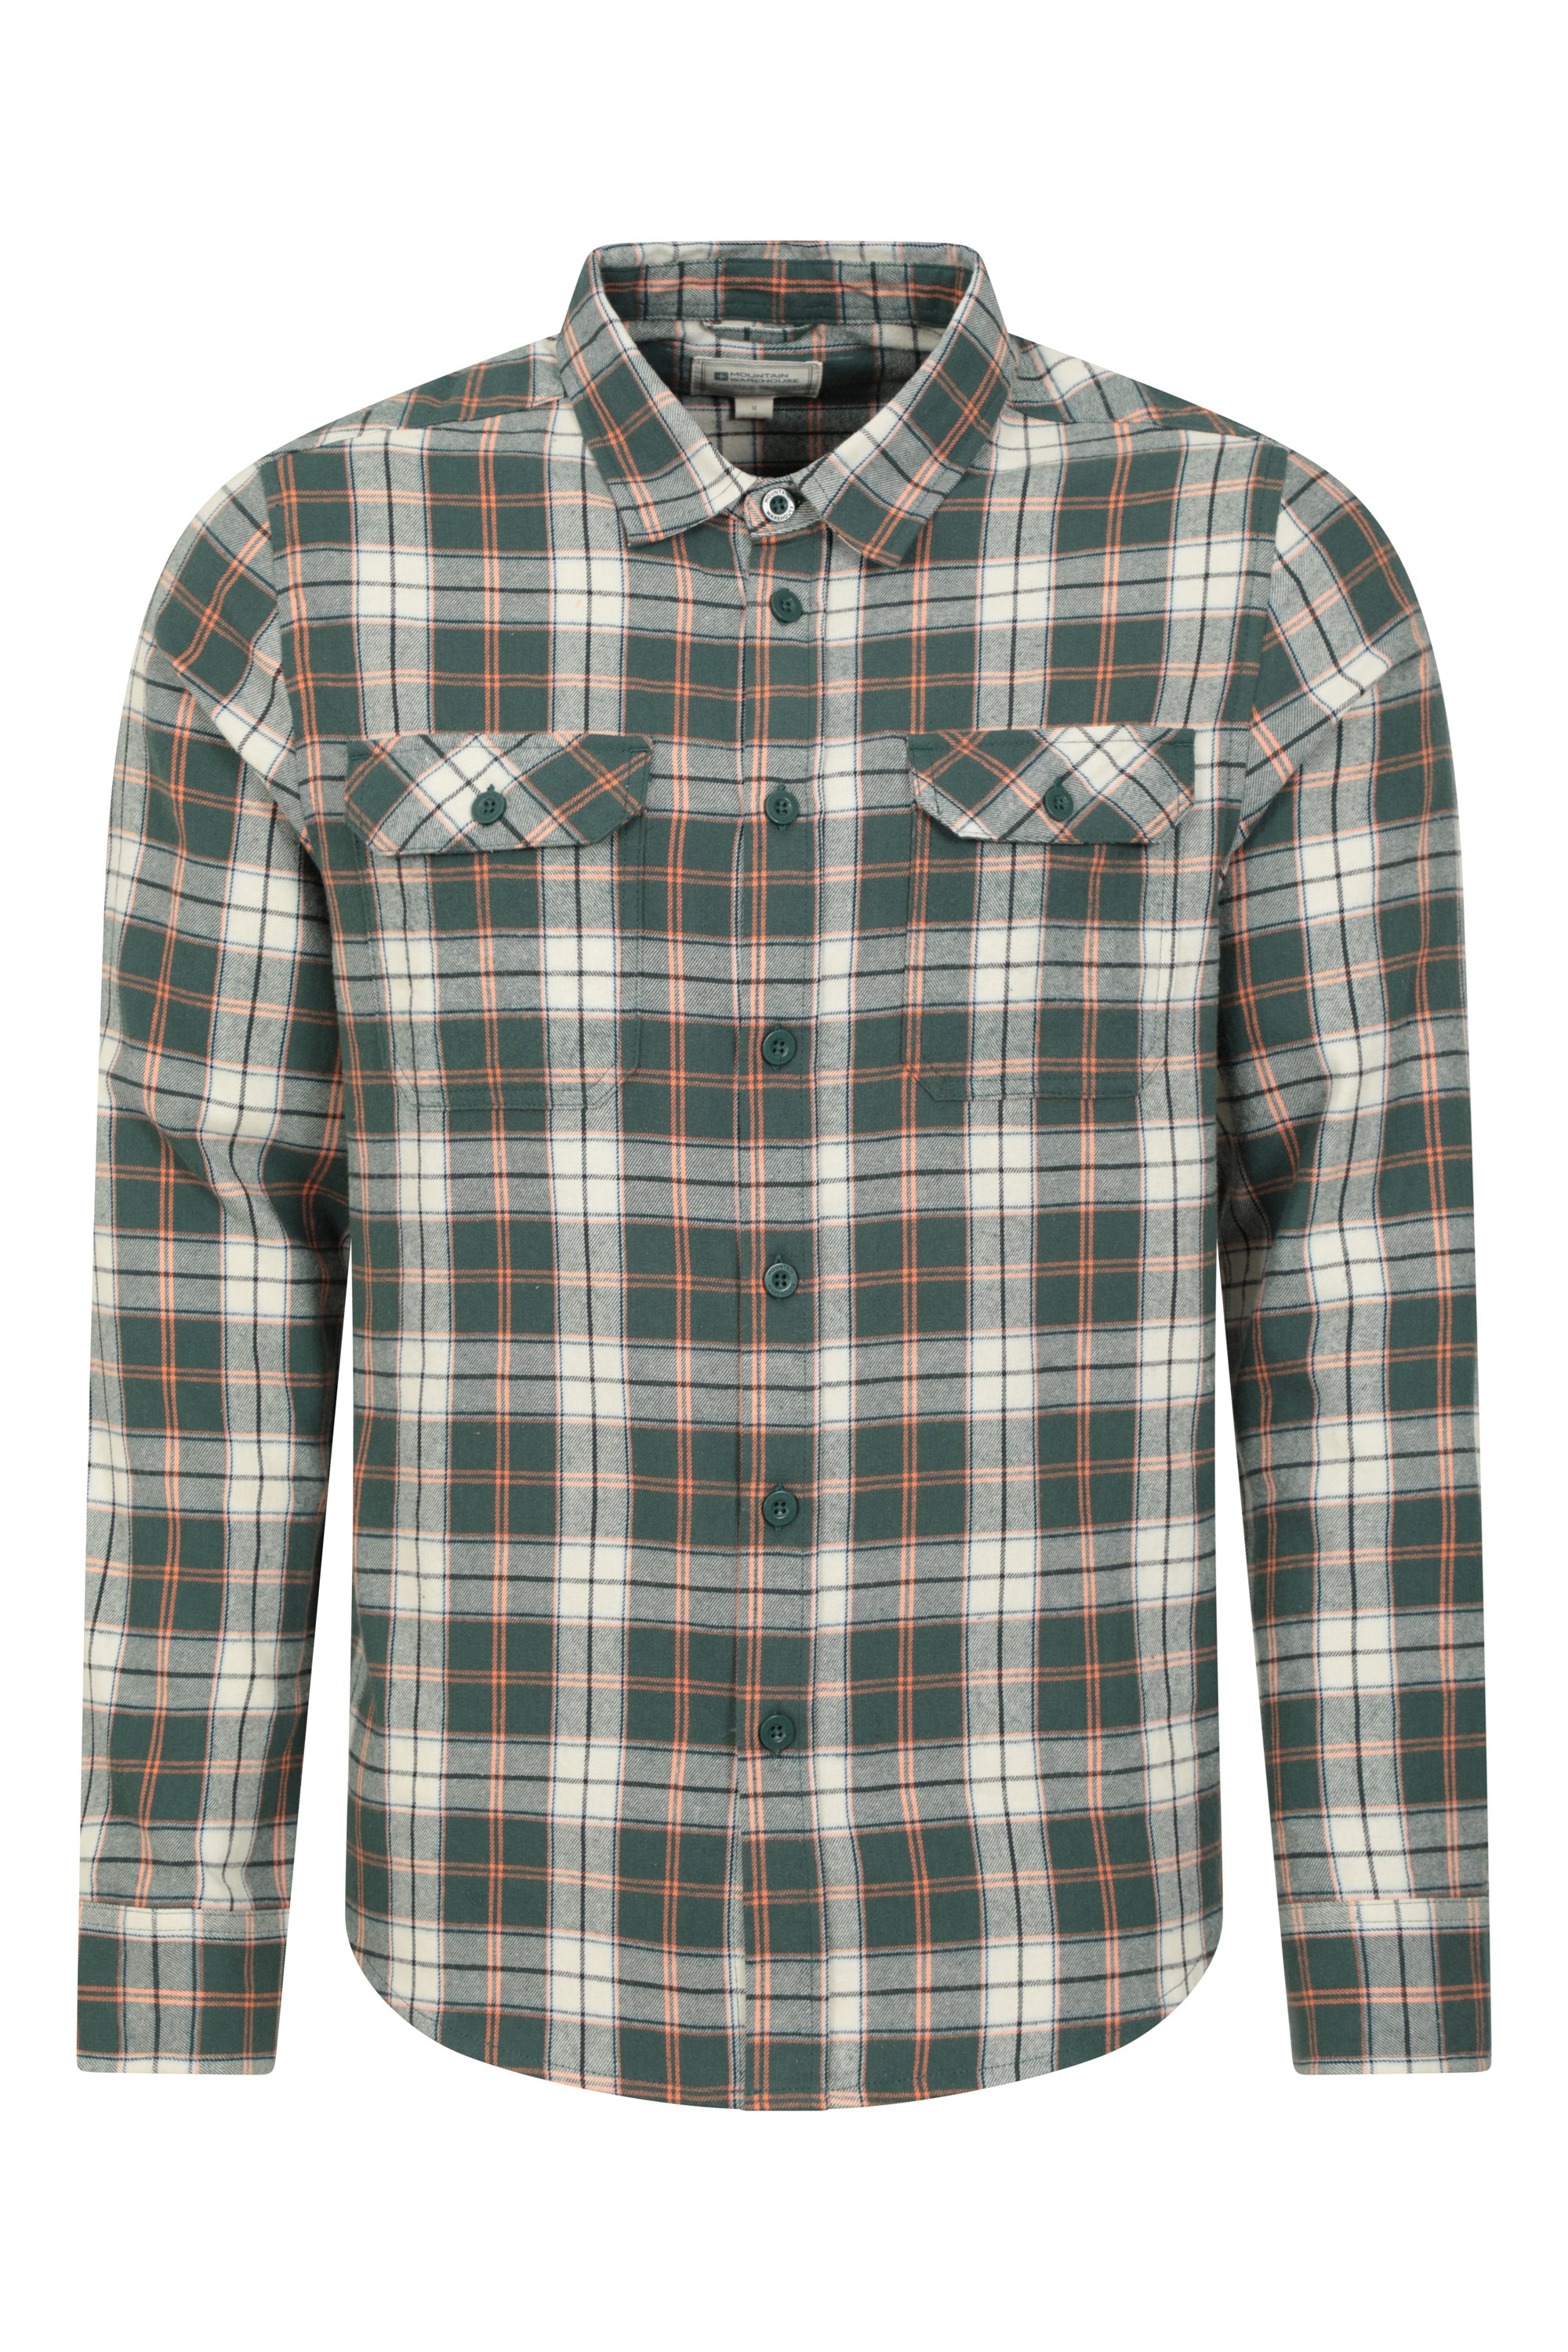 Trace Mens Flannel Long Sleeve Shirt - Green